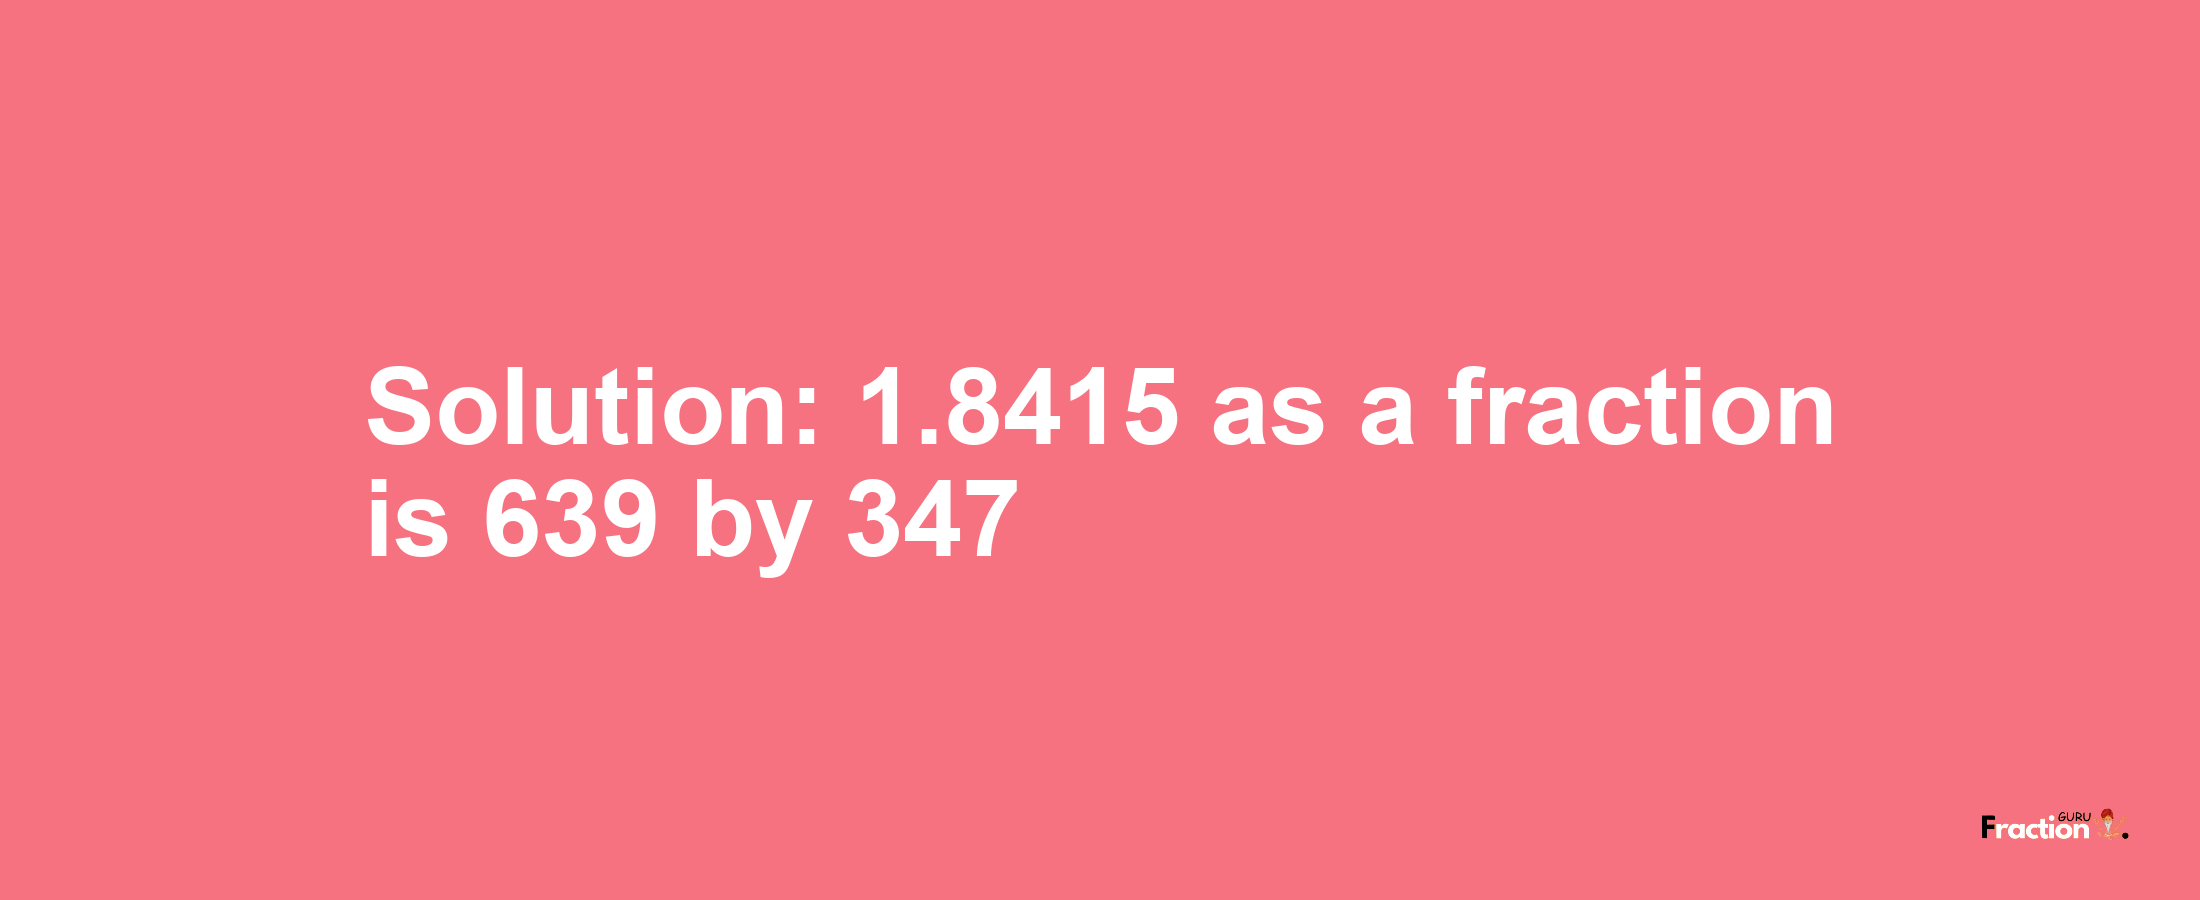 Solution:1.8415 as a fraction is 639/347